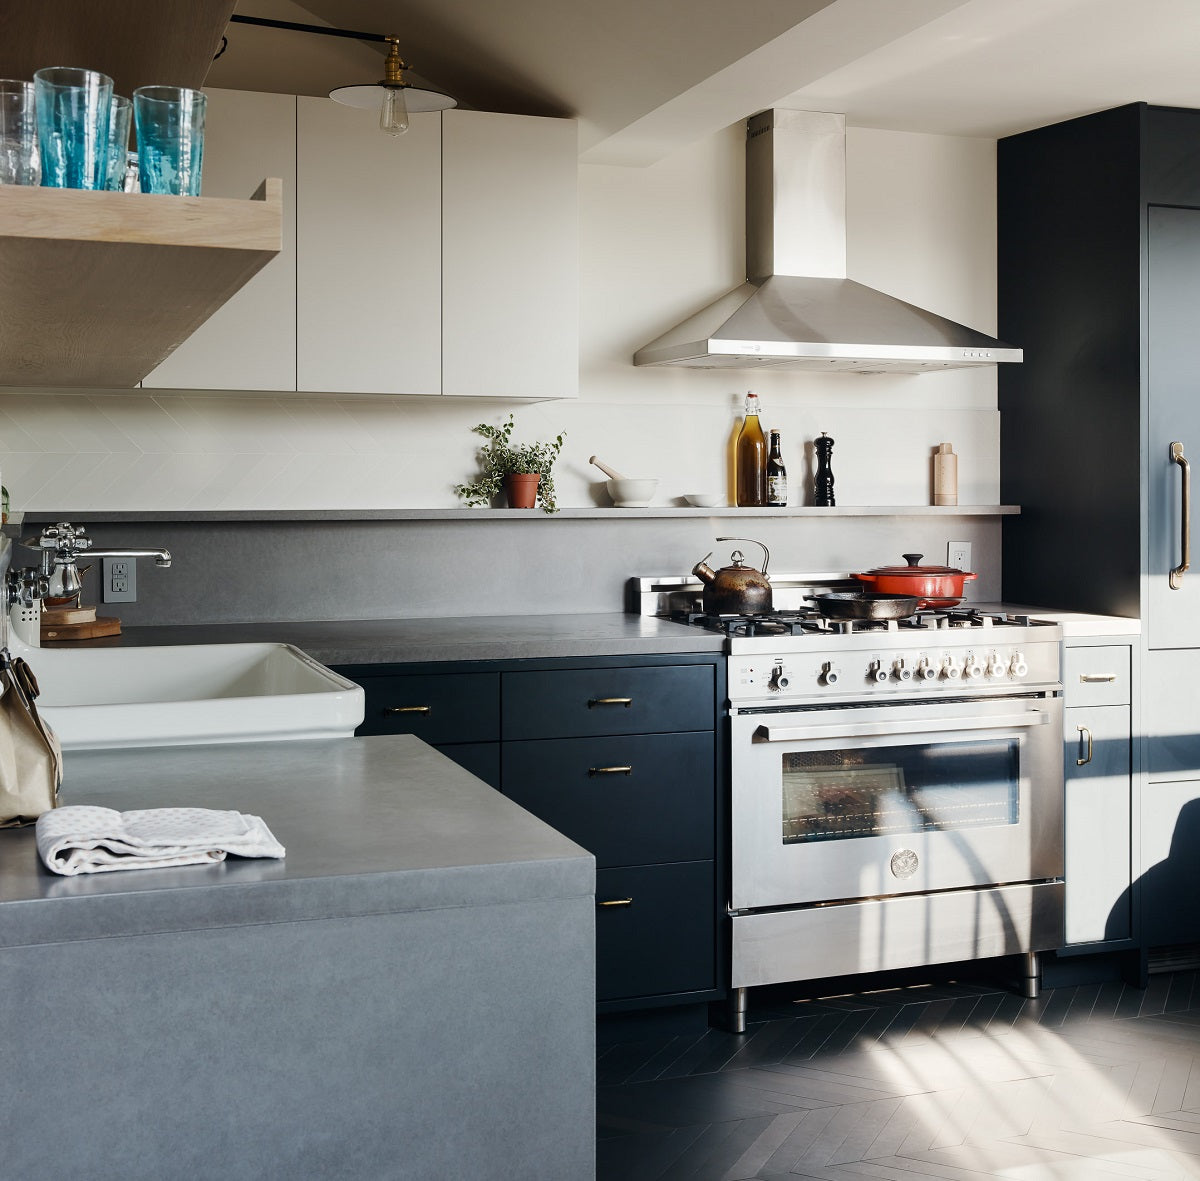 Black and gray kitchen with gray concrete waterfall countertops.